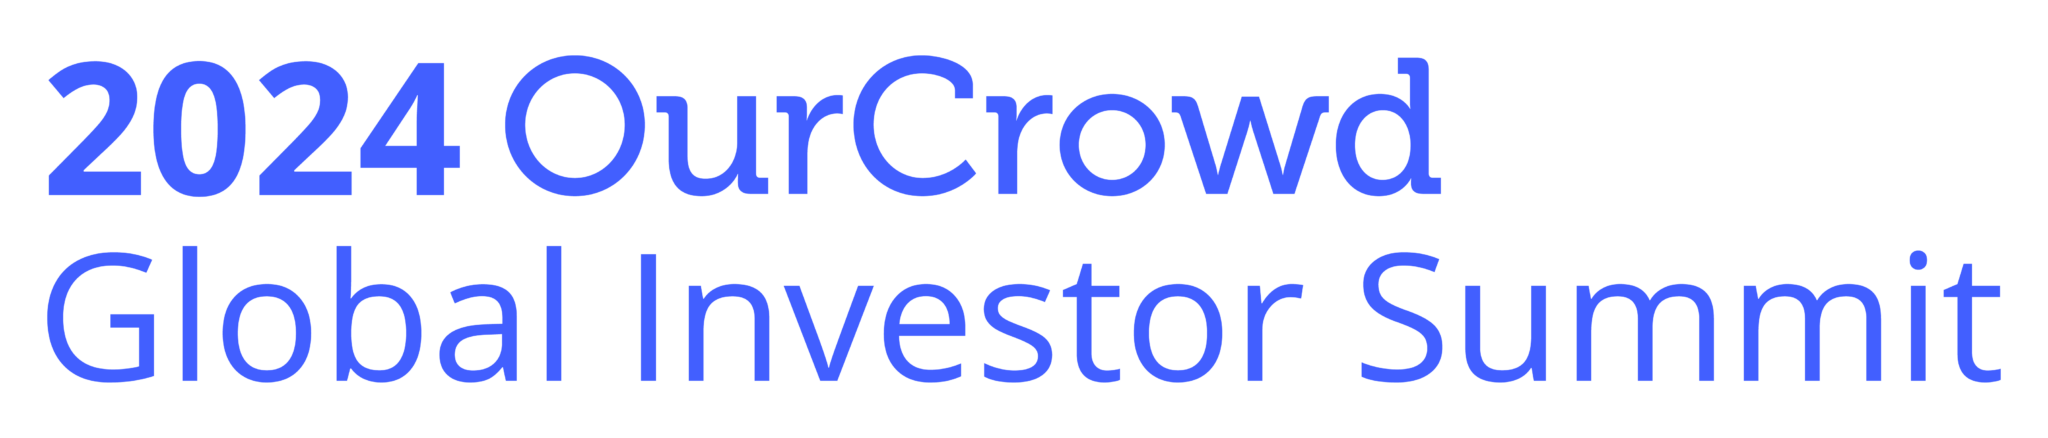 OurCrowd Global Investor Summit